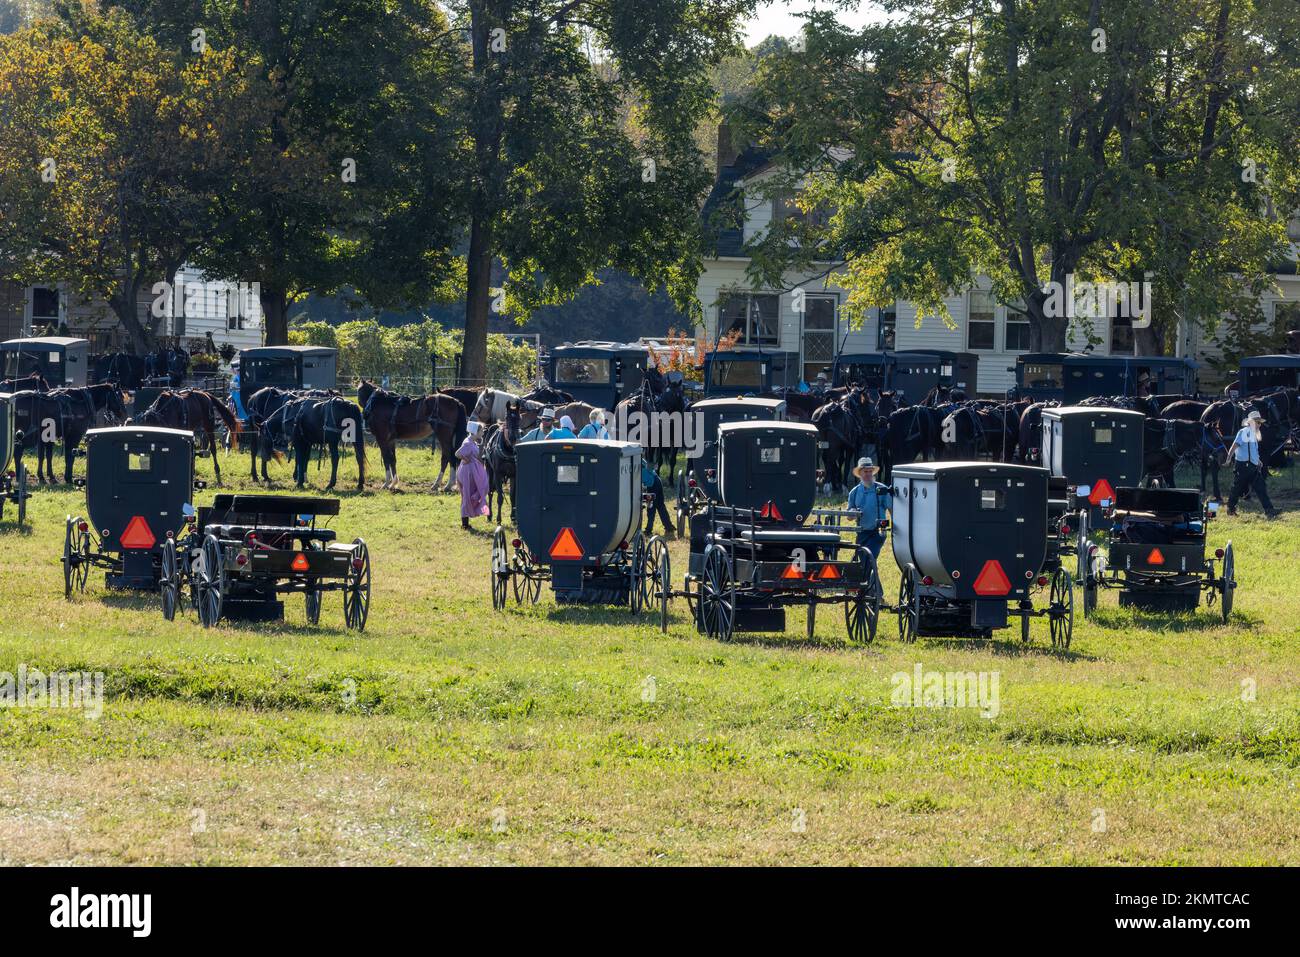 Horses and buggies in a grassy field at an auction in Casson Corner, Kent County, Delaware Stock Photo